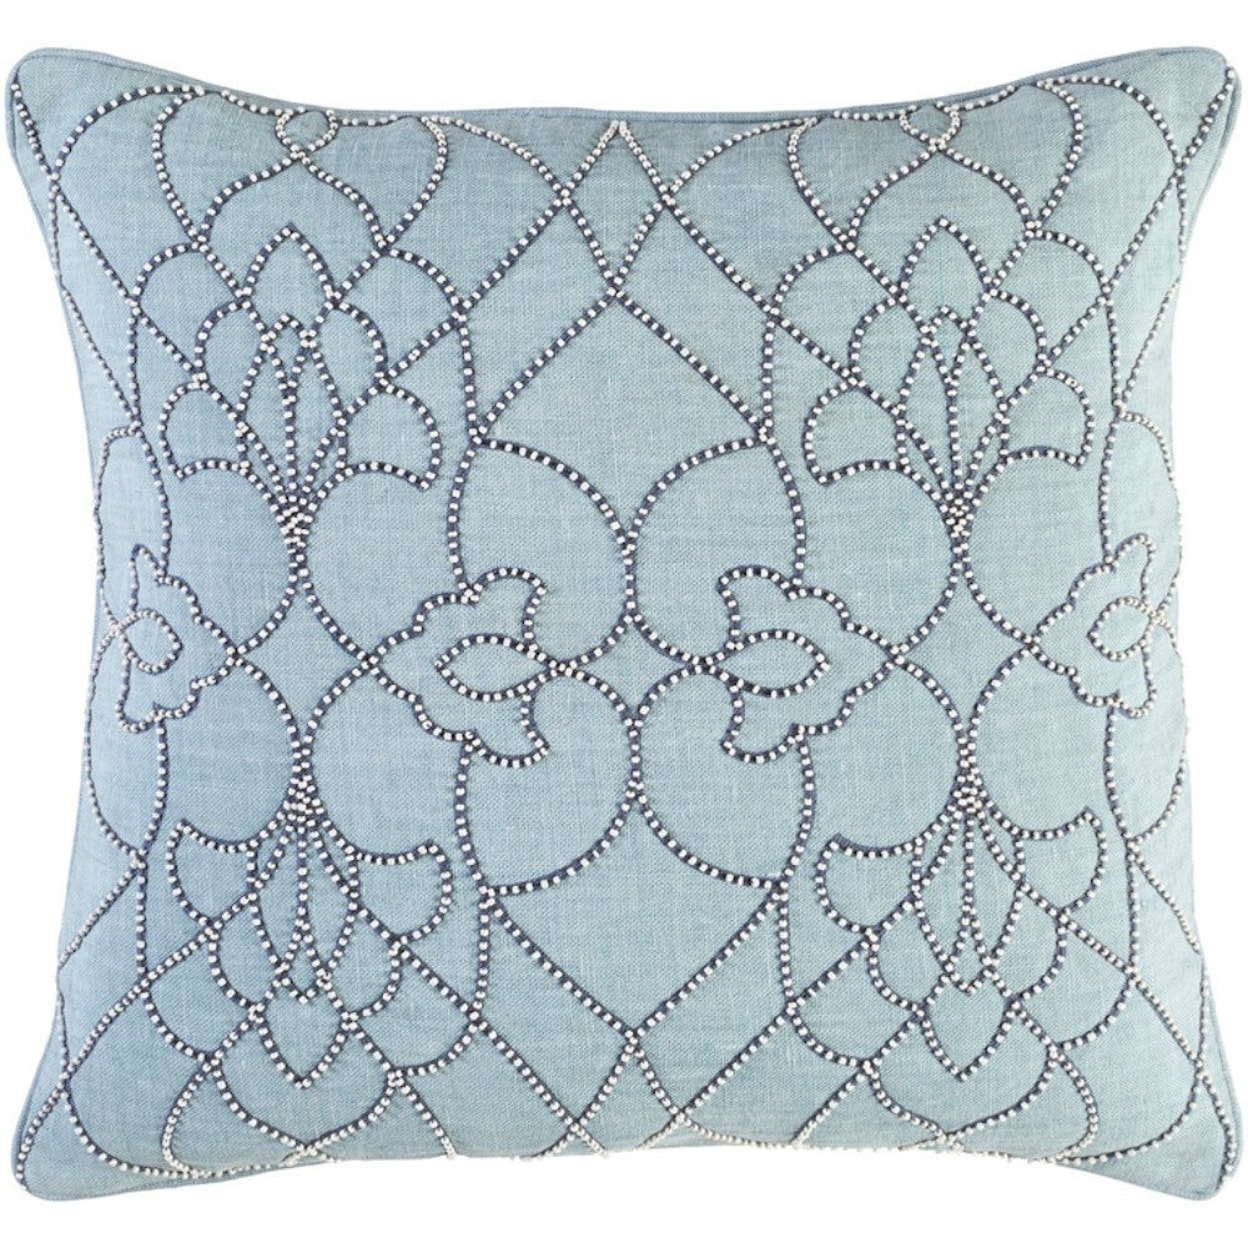 Surya Dotted Pirouette Pillow